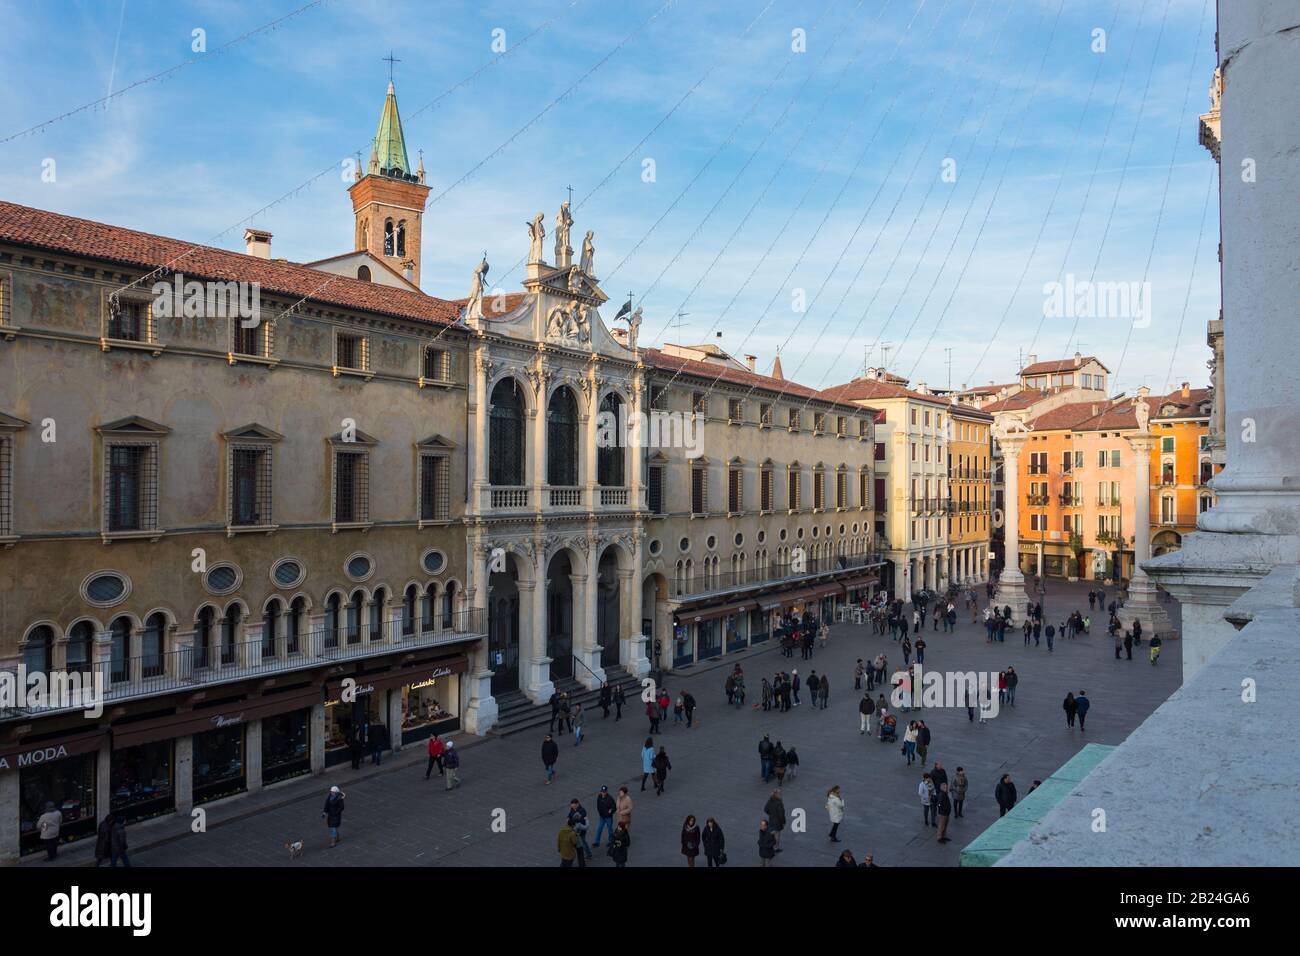 Vicenza, Italy. December 26, 2016:  The church of San Vincenzo is a historic Catholic place of worship in Vicenza. The façade looks onto Piazza dei Si Stock Photo